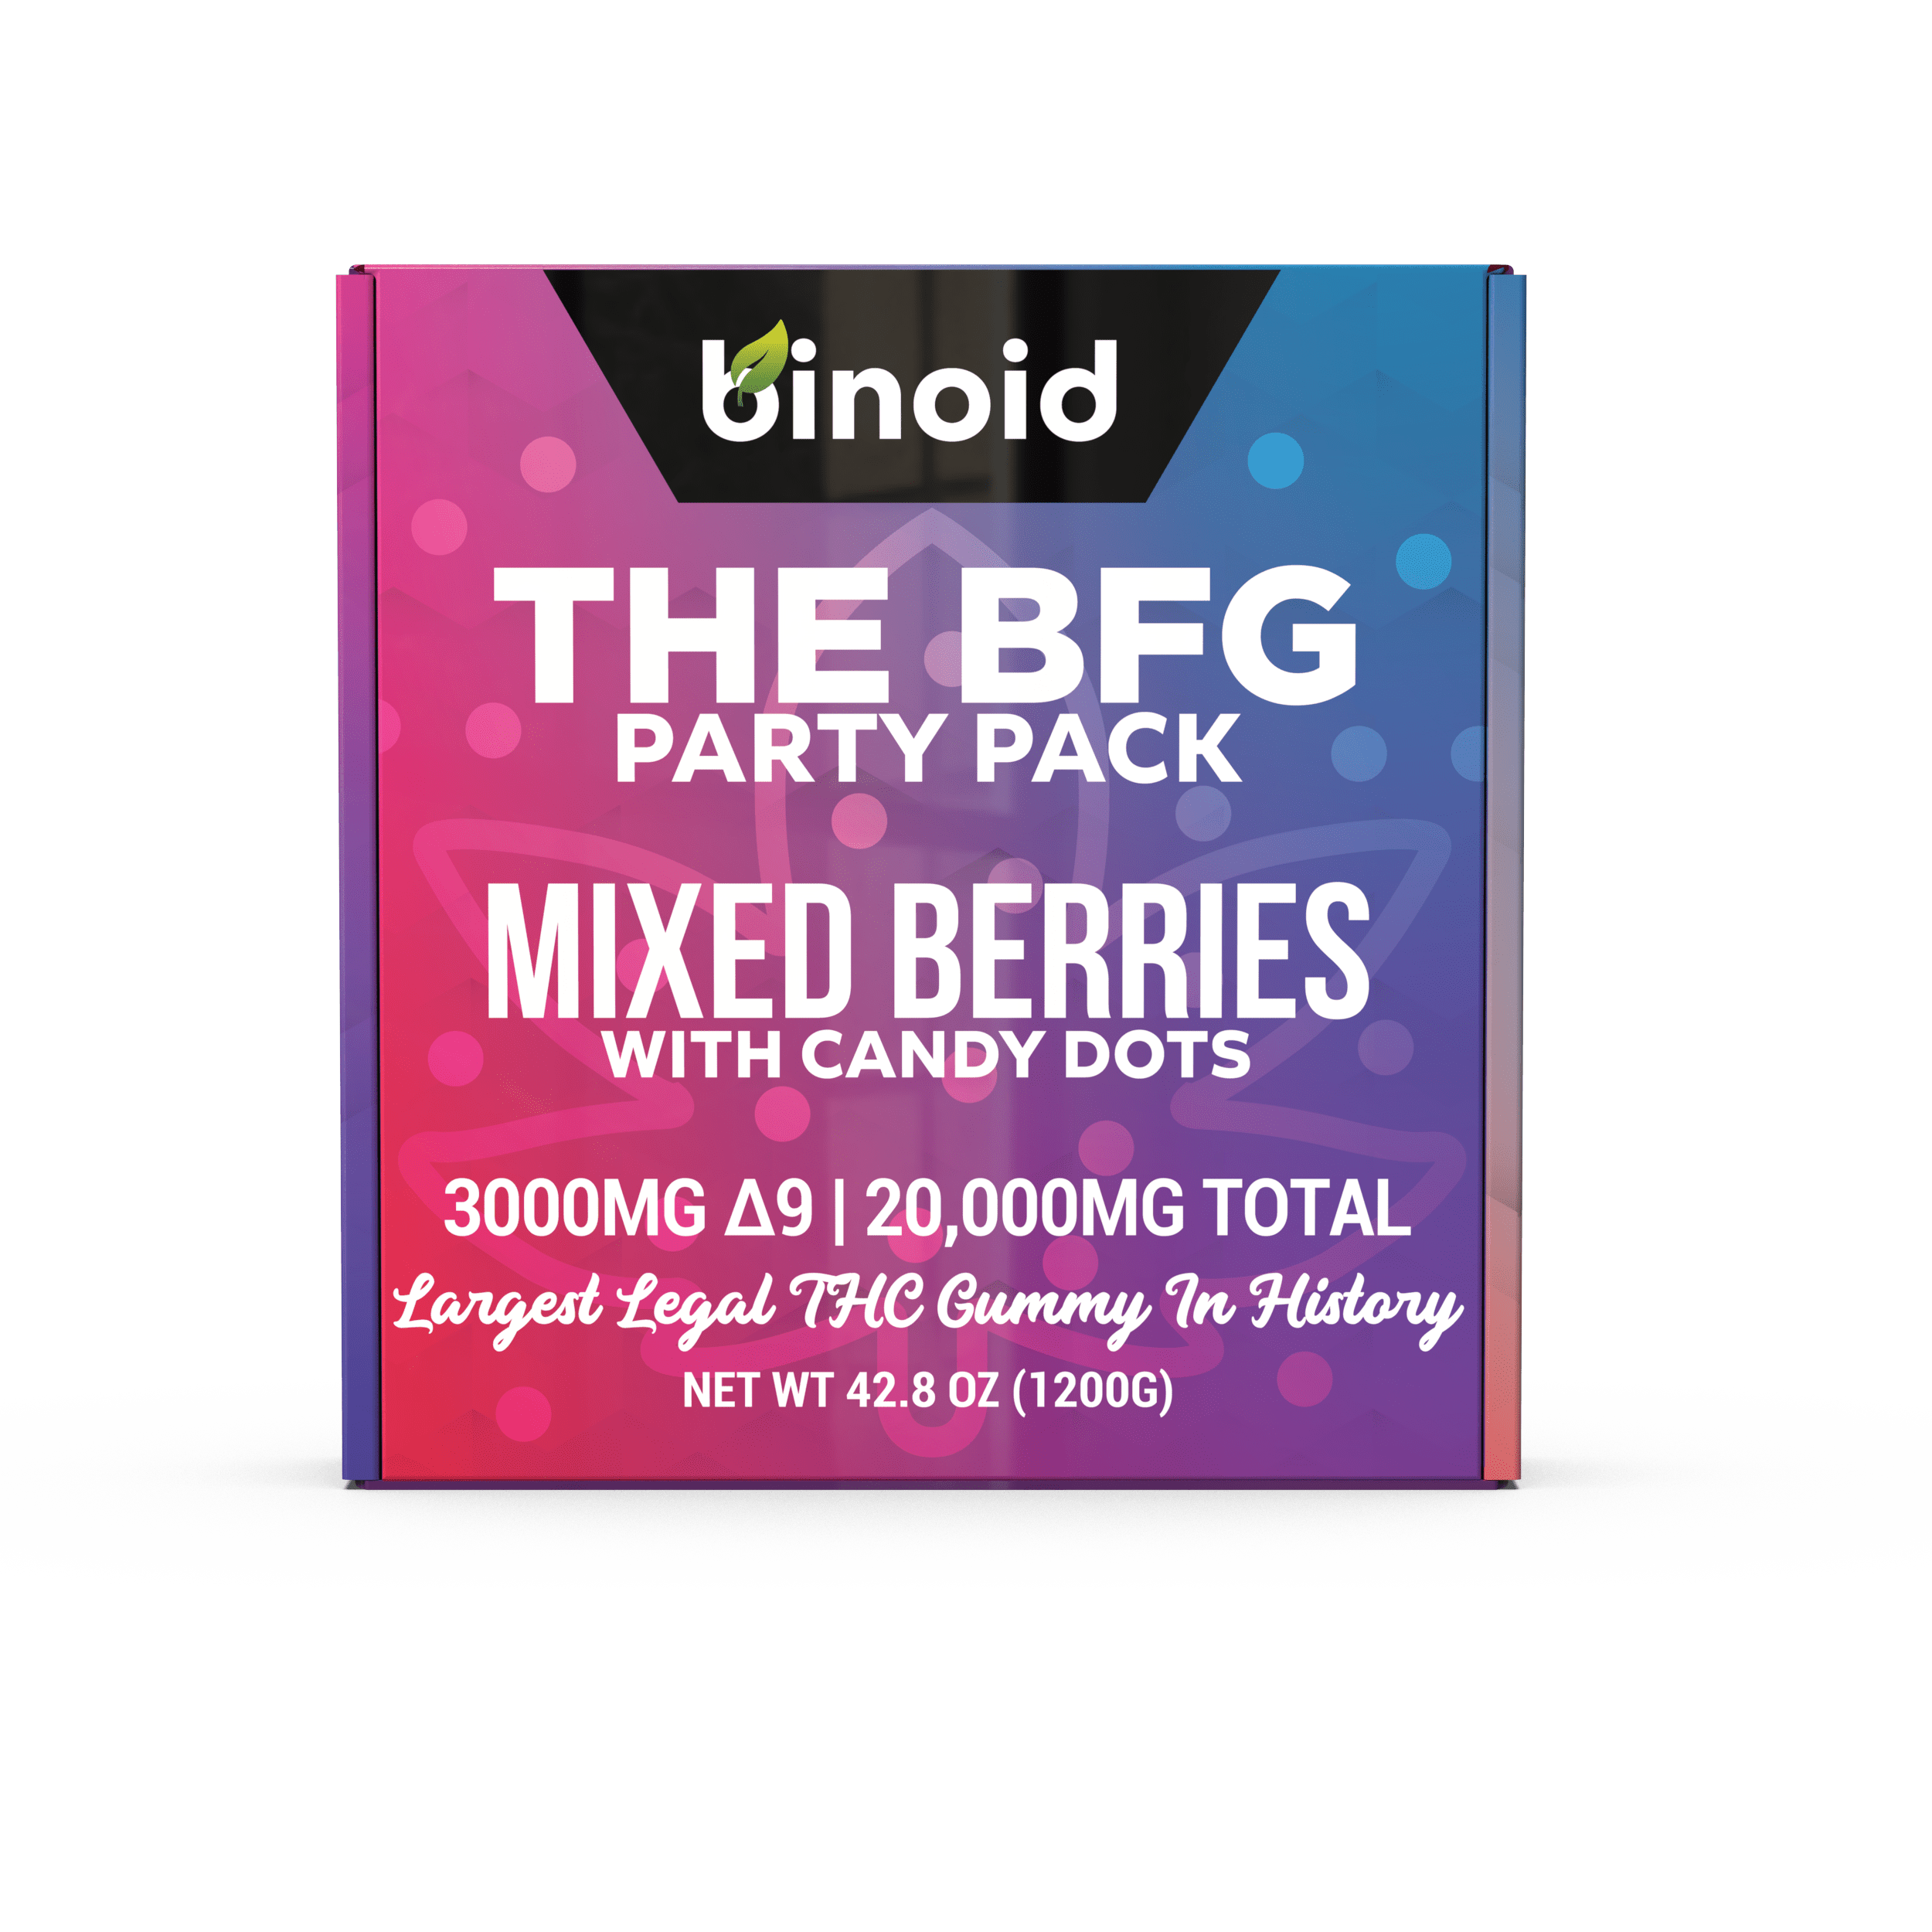 Binoid The BFG w/Candy Dots – 3000mg Largest Legal Gummy